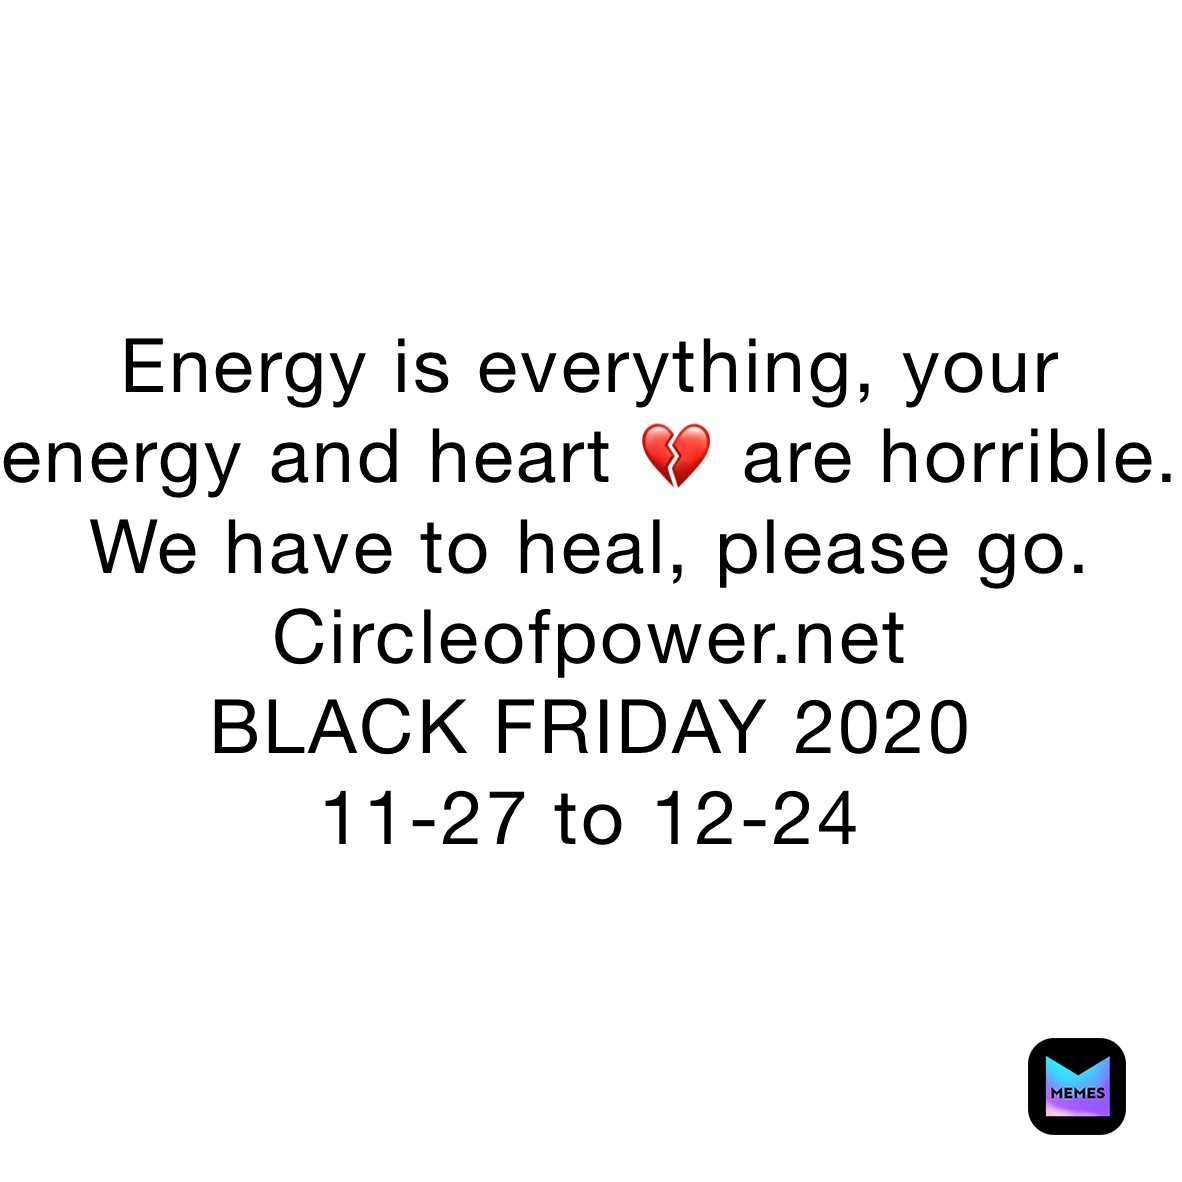 Energy is everything, your energy and heart 💔 are horrible. We have to heal, please go. 
Circleofpower.net
BLACK FRIDAY 2020
11-27 to 12-24